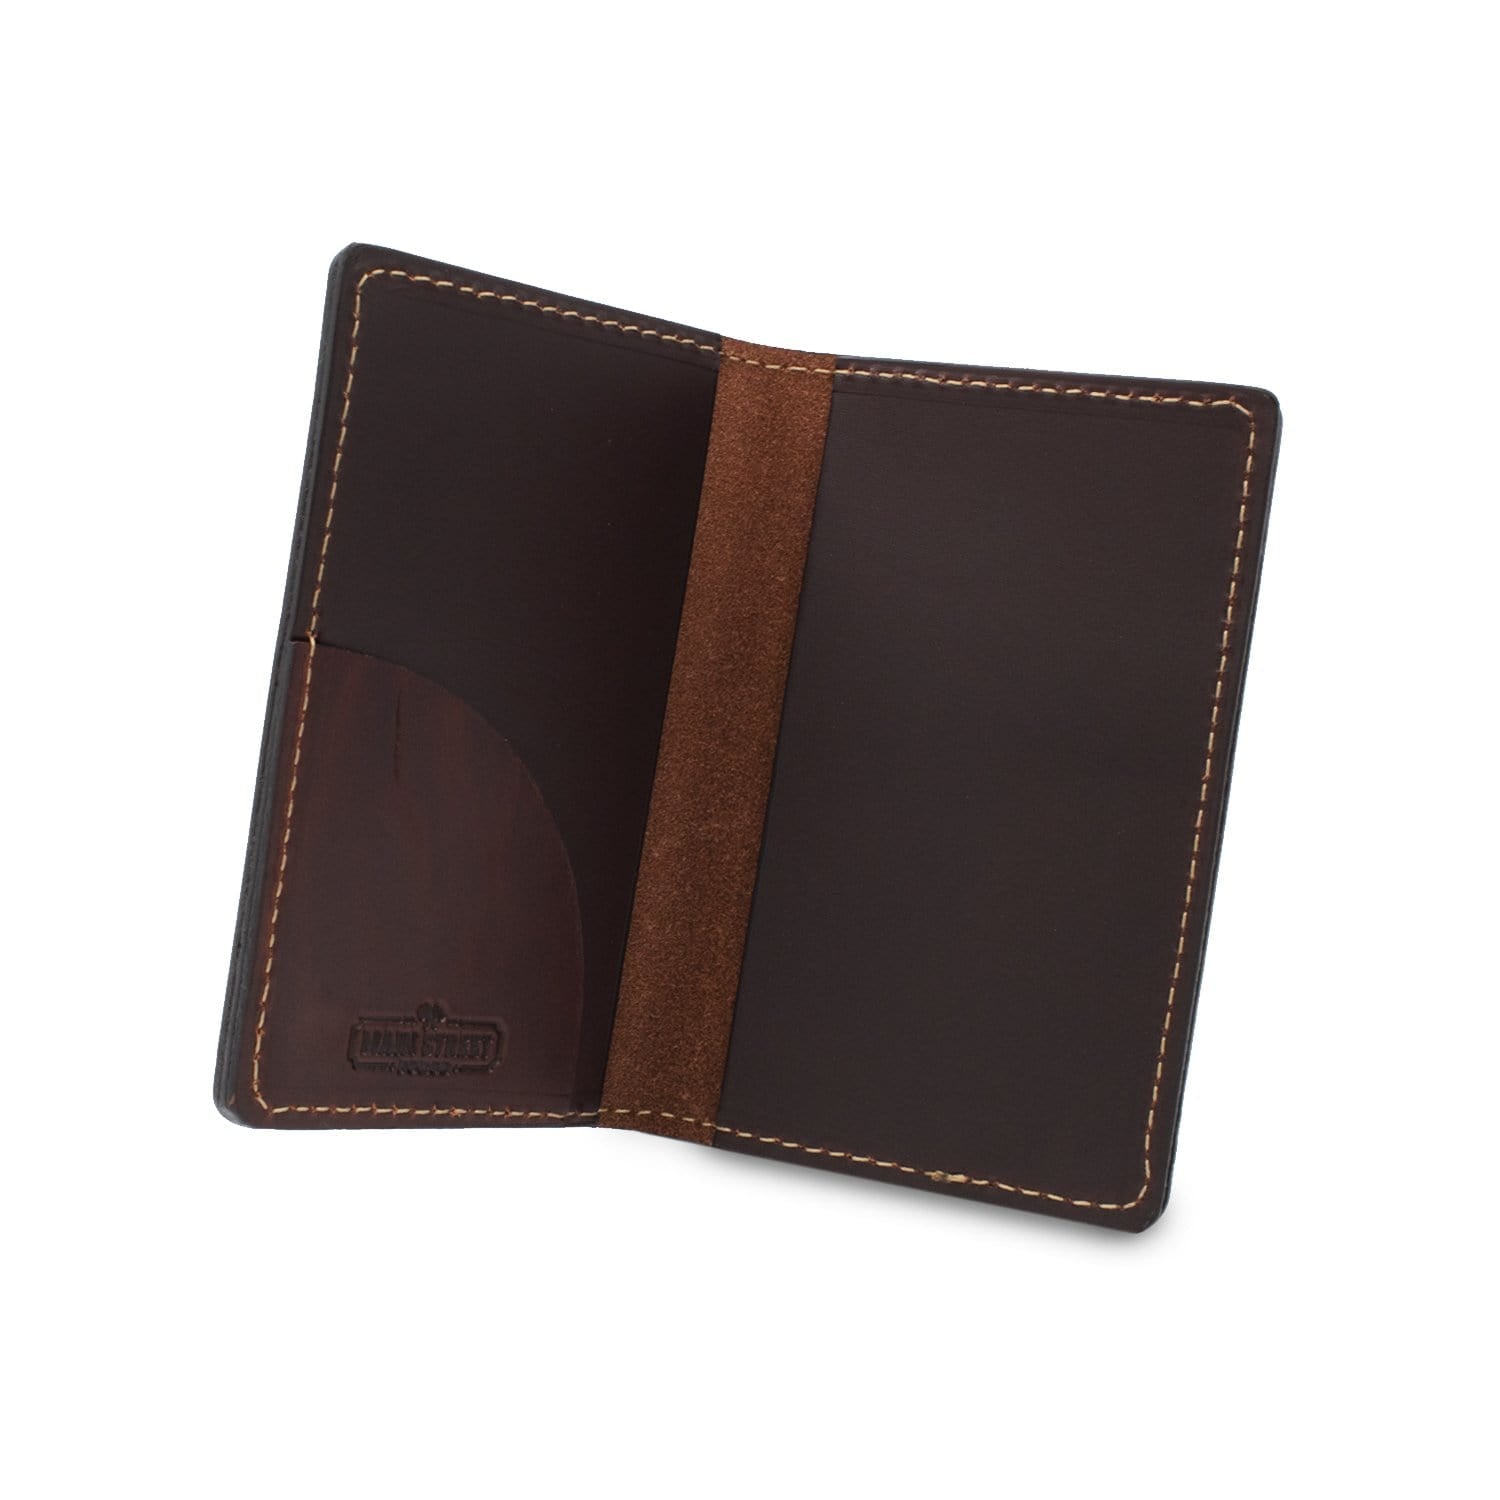 The Passport Wallet - Leather U.S. Citizen Travel Companion – Make Smith  Leather Co. - Full Grain Custom Leather Crafting, wallets, belts, leather  bags, totes and purses.